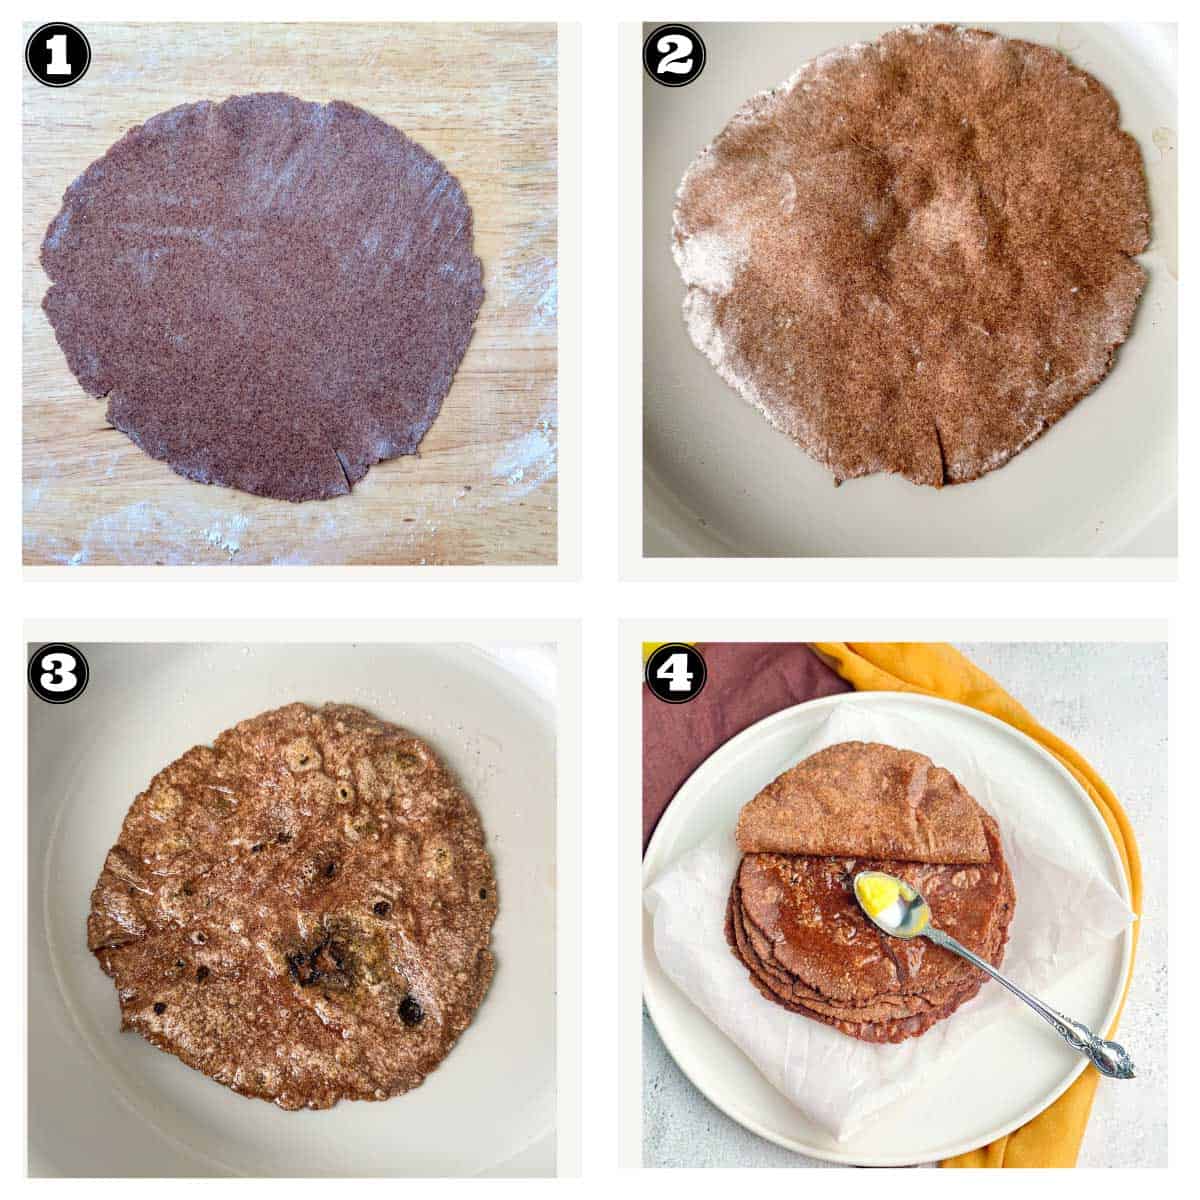 steps by step images of cooking gluten free roti